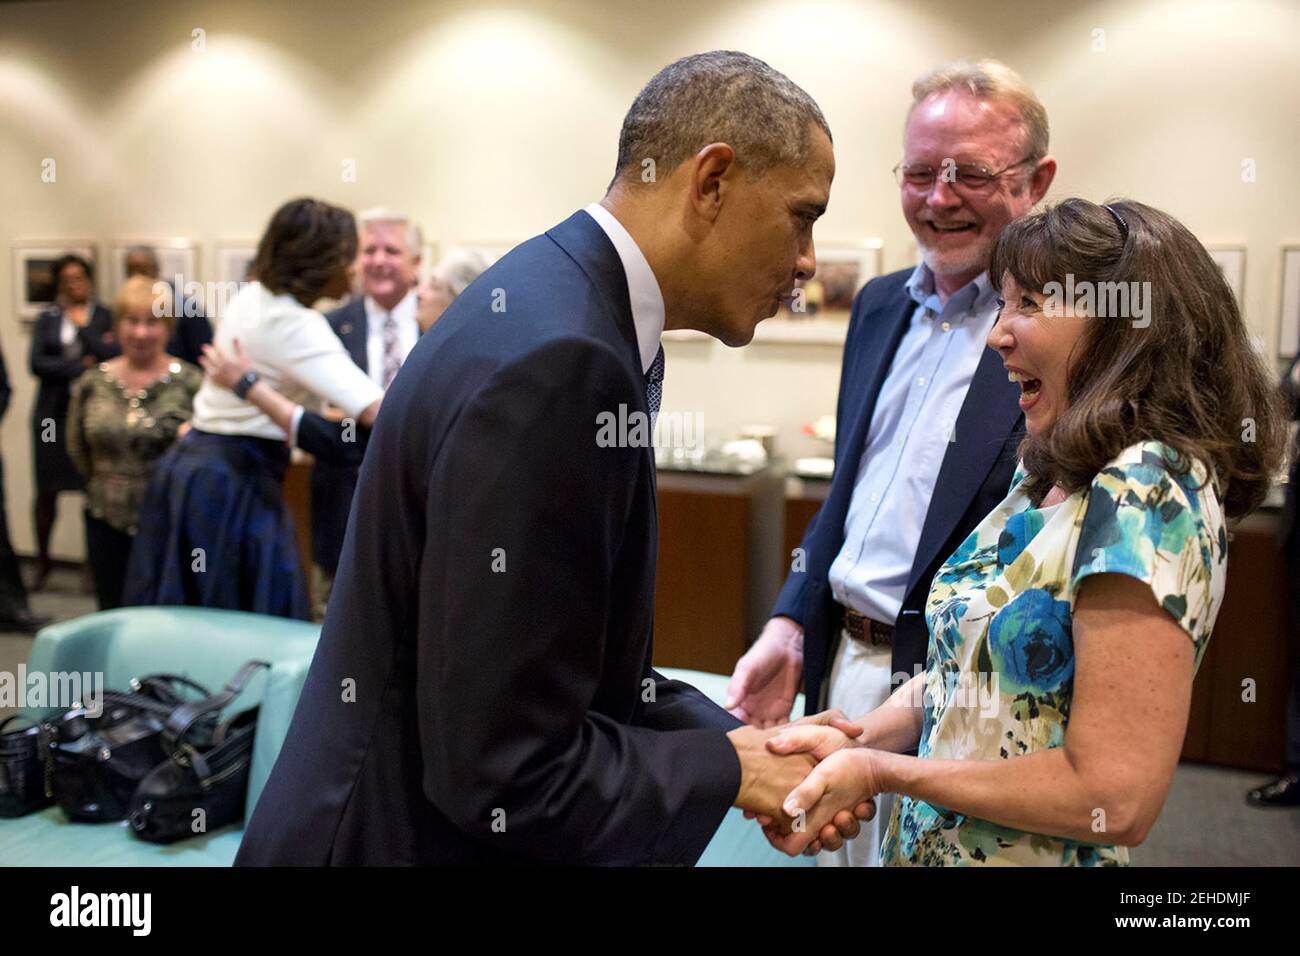 President Barack Obama greets Linda and Russ Dickson, a Texas couple who wrote a letter to the President about the Affordable Care Act, at the Lyndon Baines Johnson Presidential Library in Austin, Texas, April 10, 2014. Stock Photo